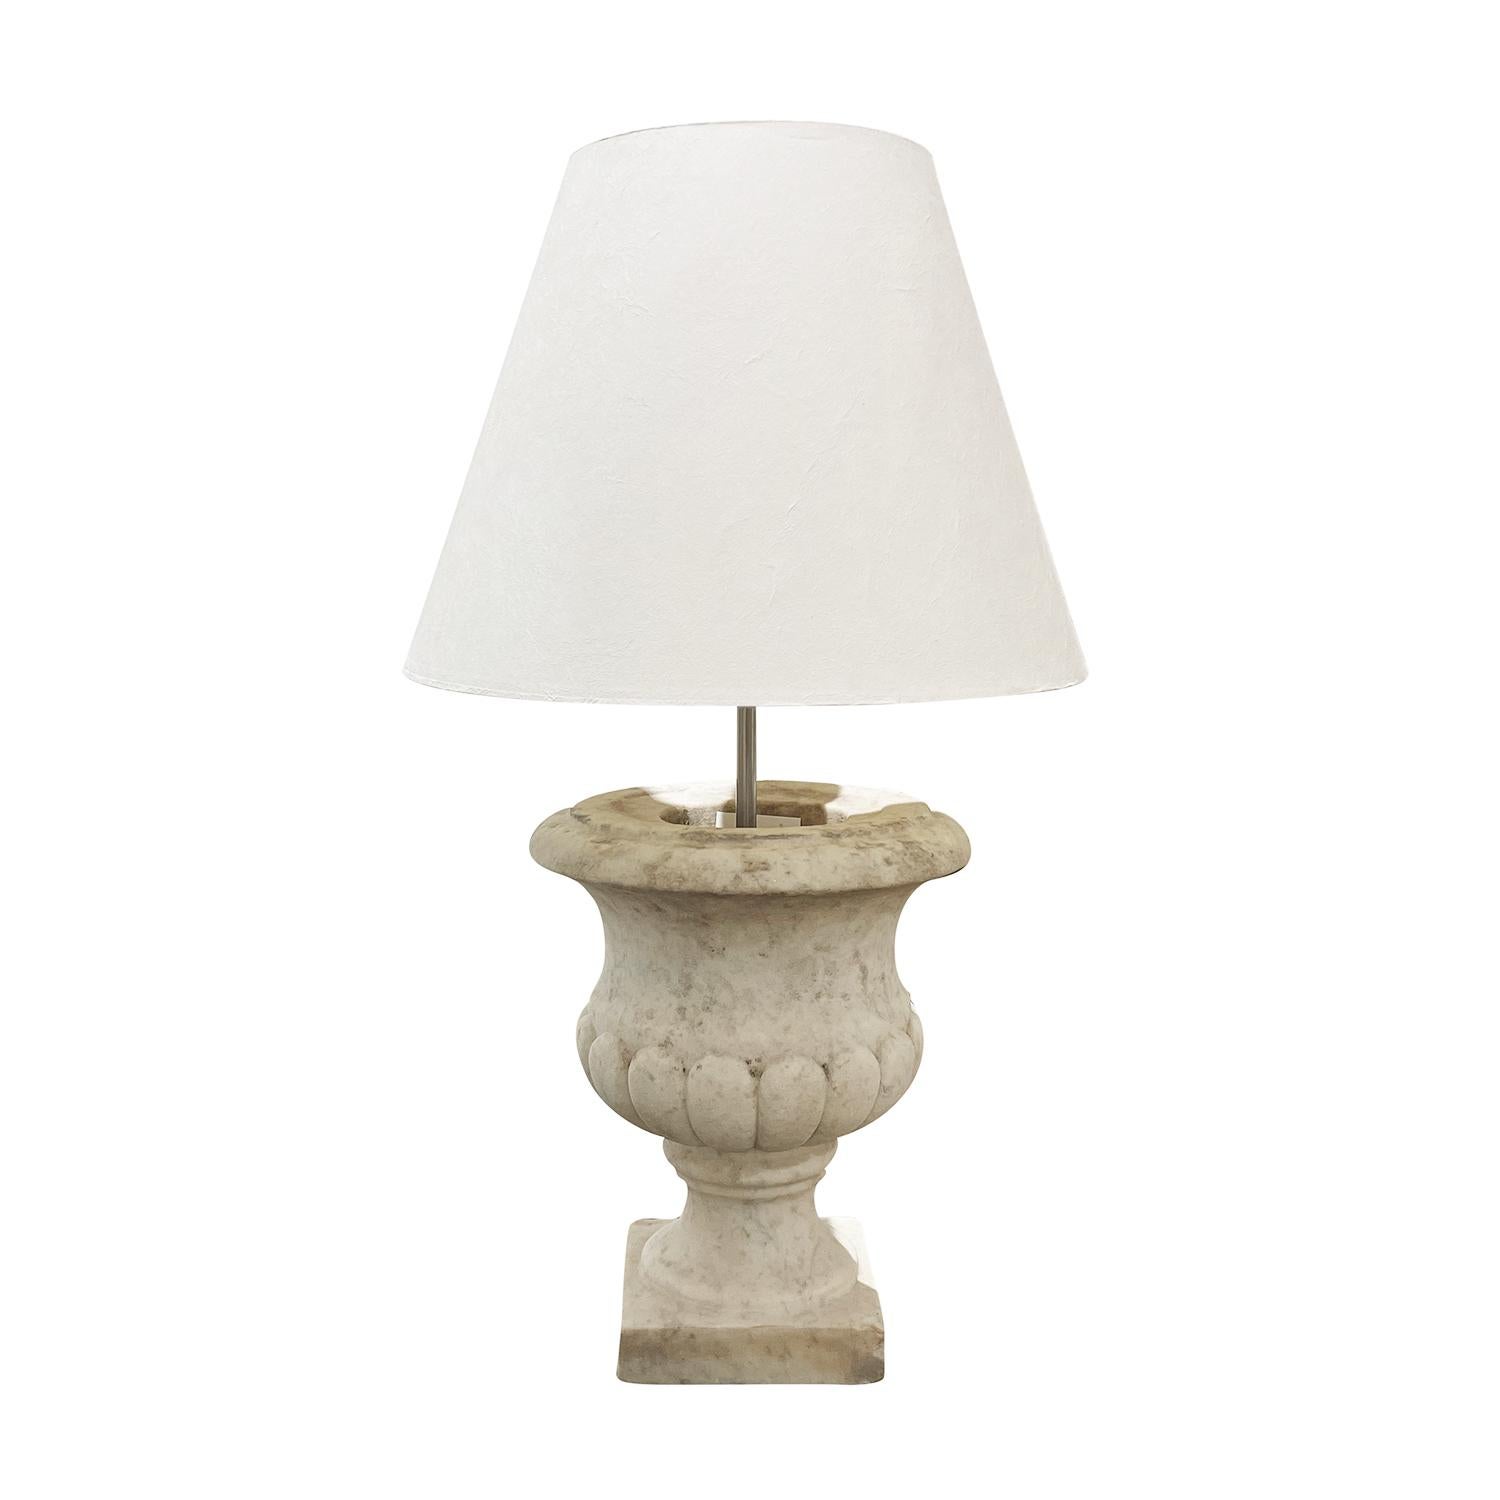 A vintage Mid-Century Italian table lamp made of hand crafted marble with the original shade and a single light socket. The marble bodice is in the shape of a garden urn. The wires have been renewed. Minor fading, due to age. Wear consistent with